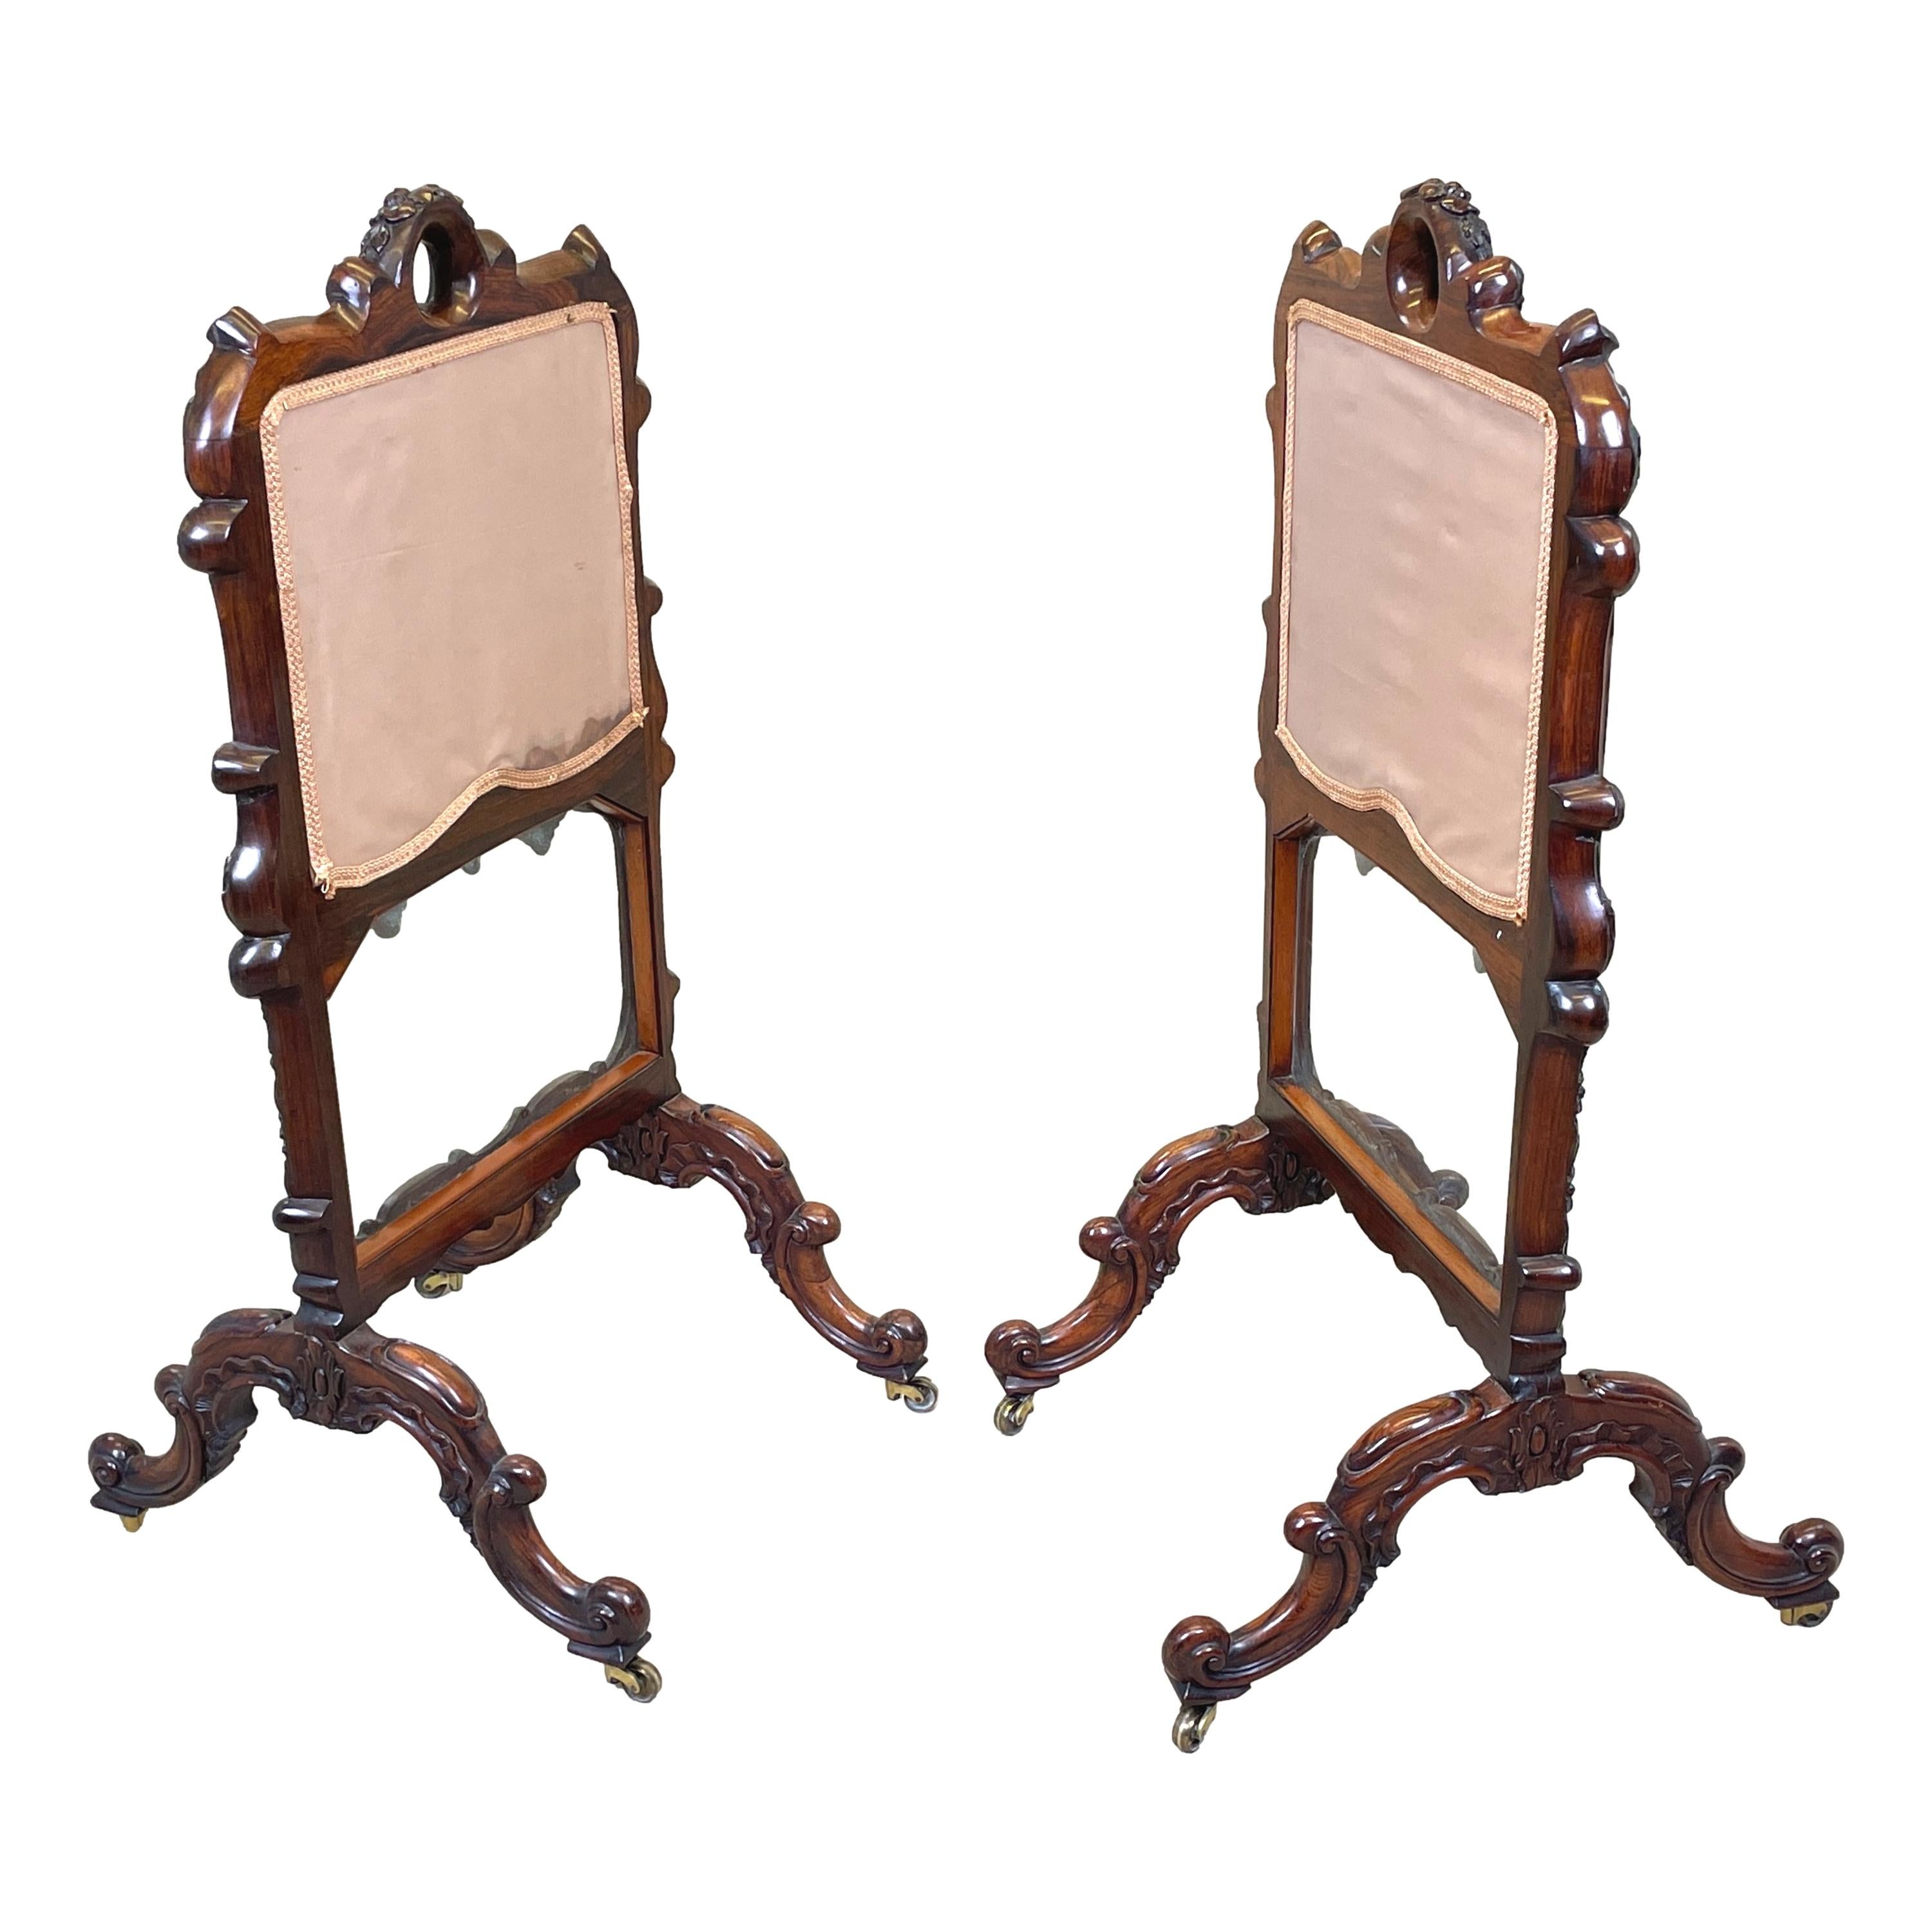 Regency 19th Century Pair of Rosewood Fire Screens For Sale 3